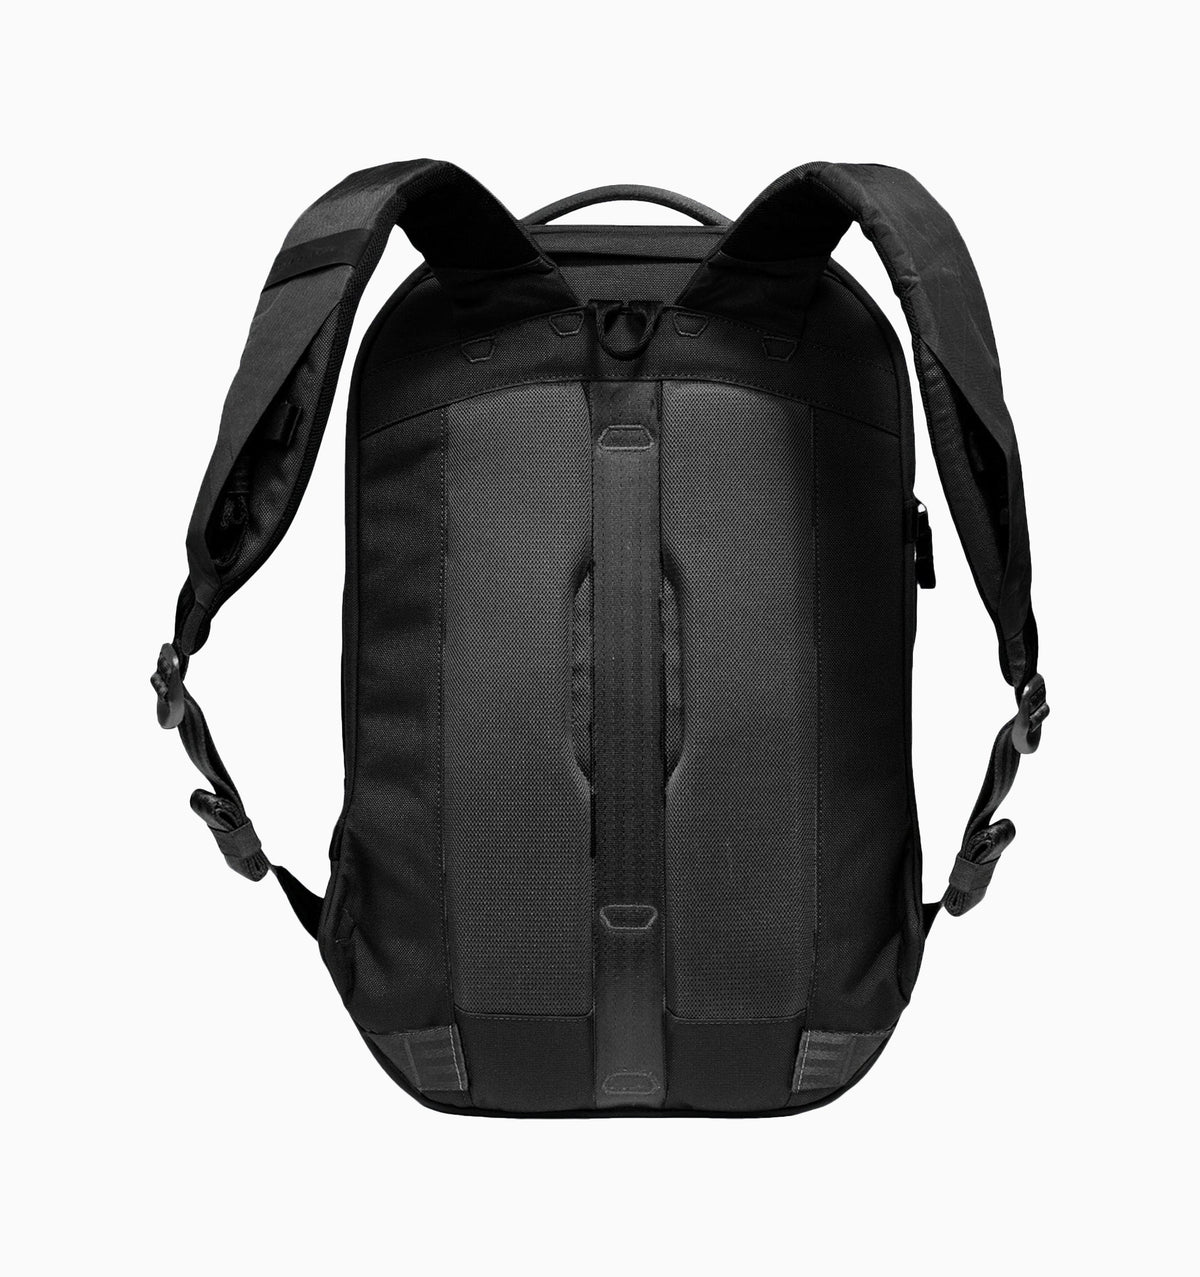 Able Carry 17" Max Backpack 30L - Tarmac Black